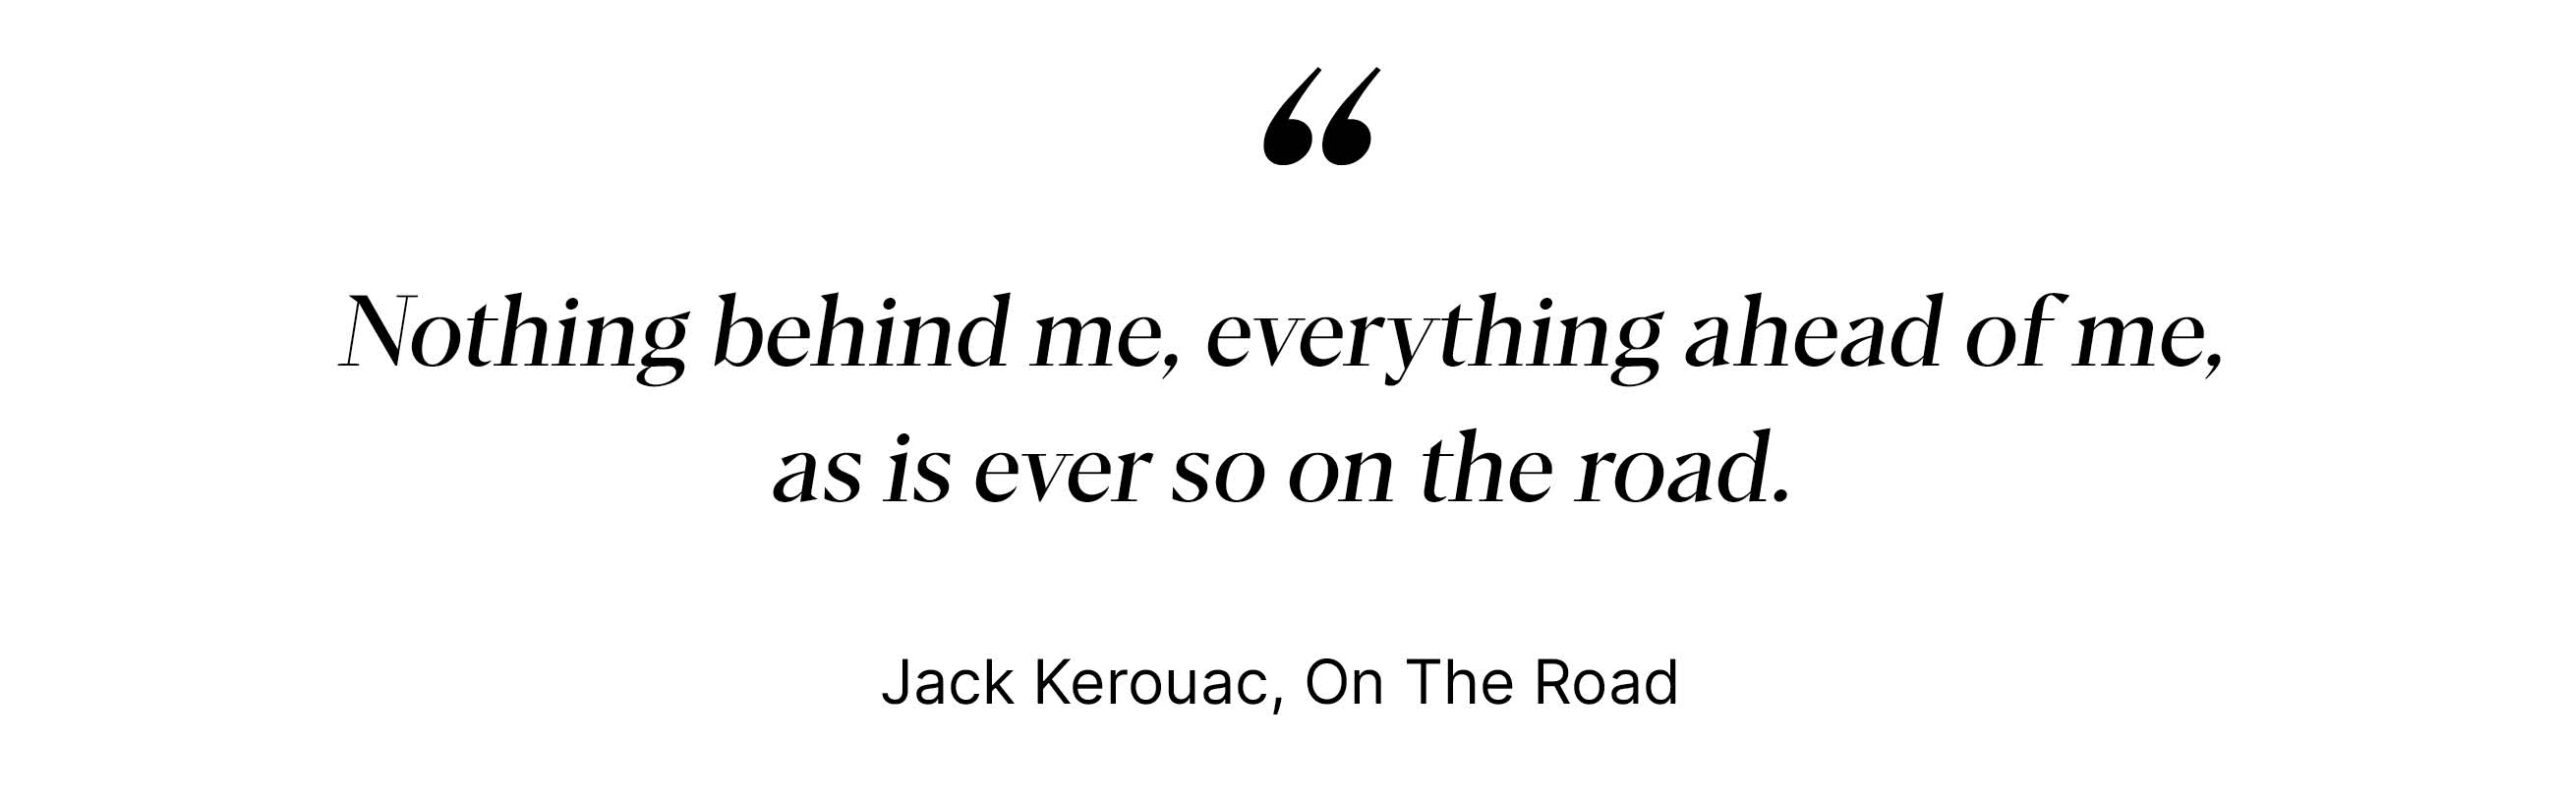 "Nothing behind me, everything ahead of me, as is ever so on the road." - Jack Kerouac